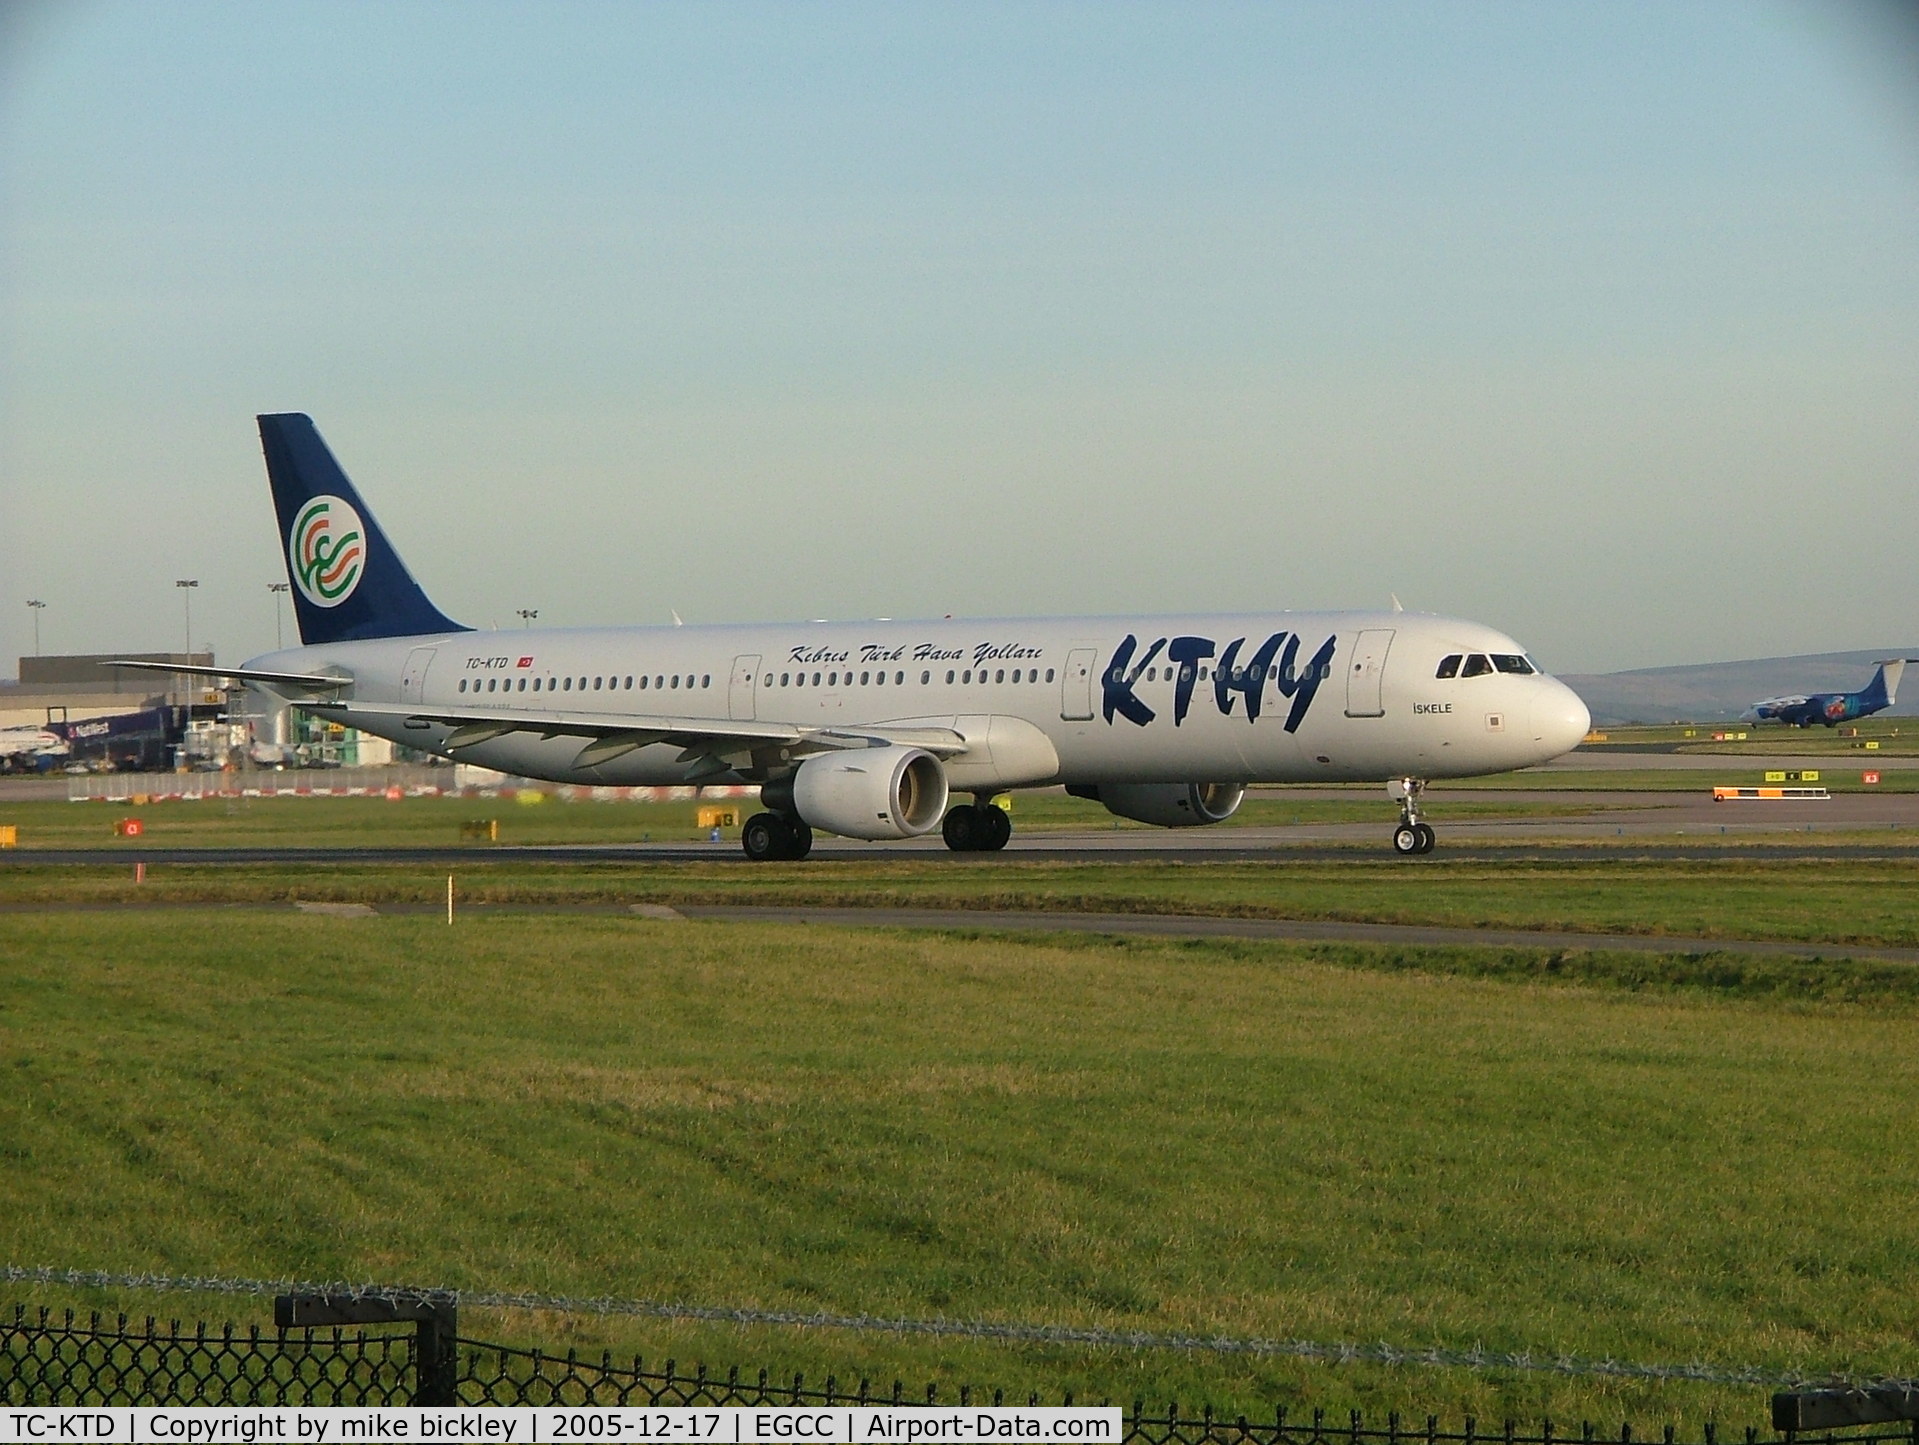 TC-KTD, 2003 Airbus A321-211 C/N 2117, TAXI TO DEPART